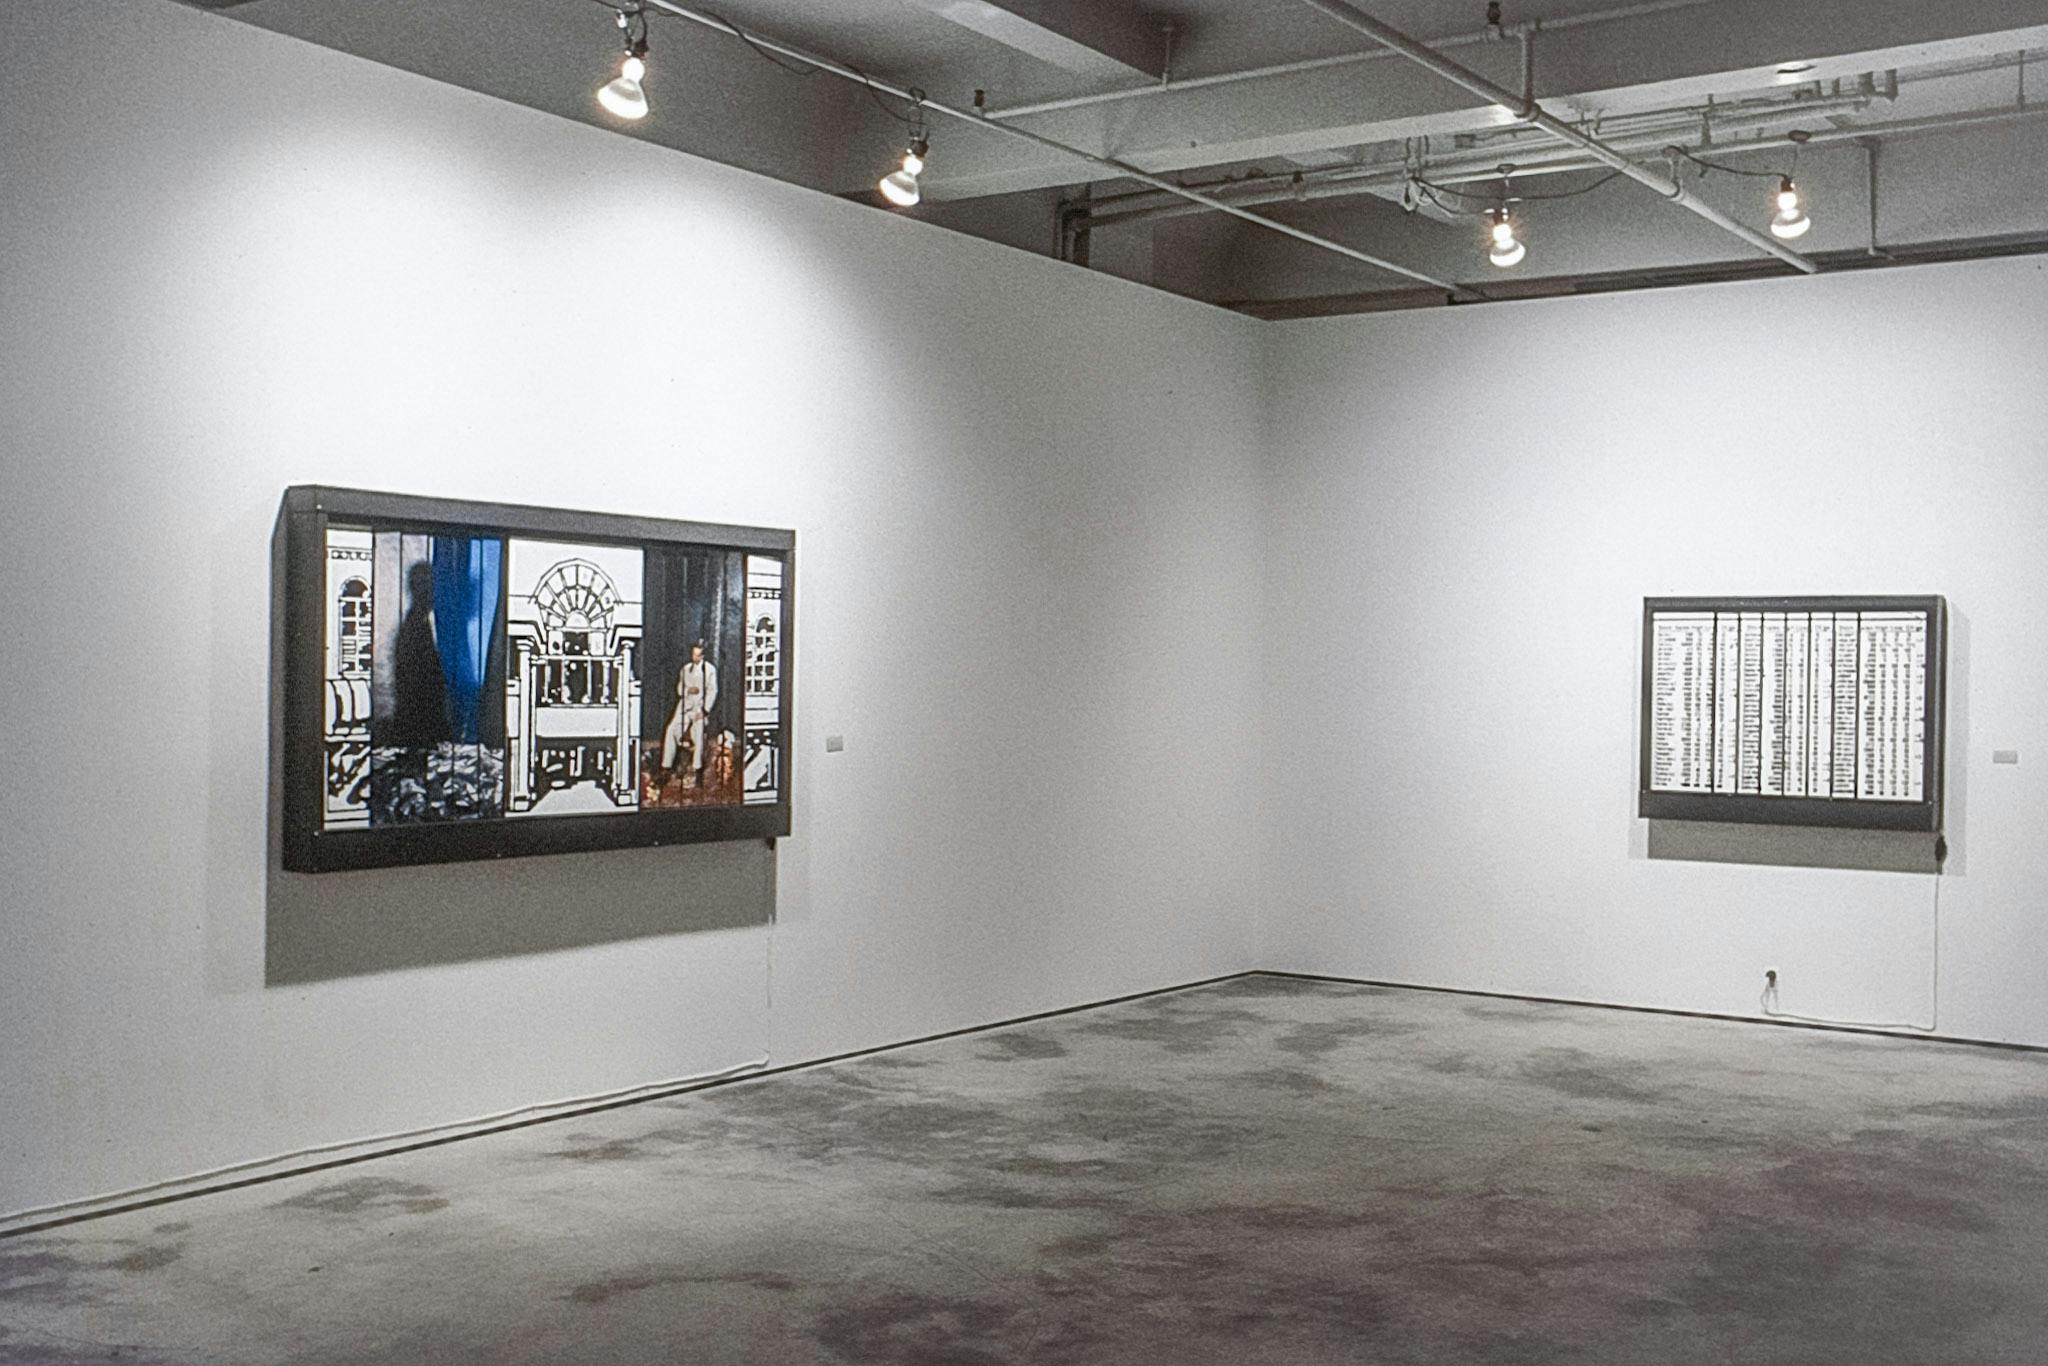 2 works on the walls of a gallery, the works are mounted in thick black frames, resembling billboards. The words show fragmented images including architectural drawings, datasheets, and colour photos.